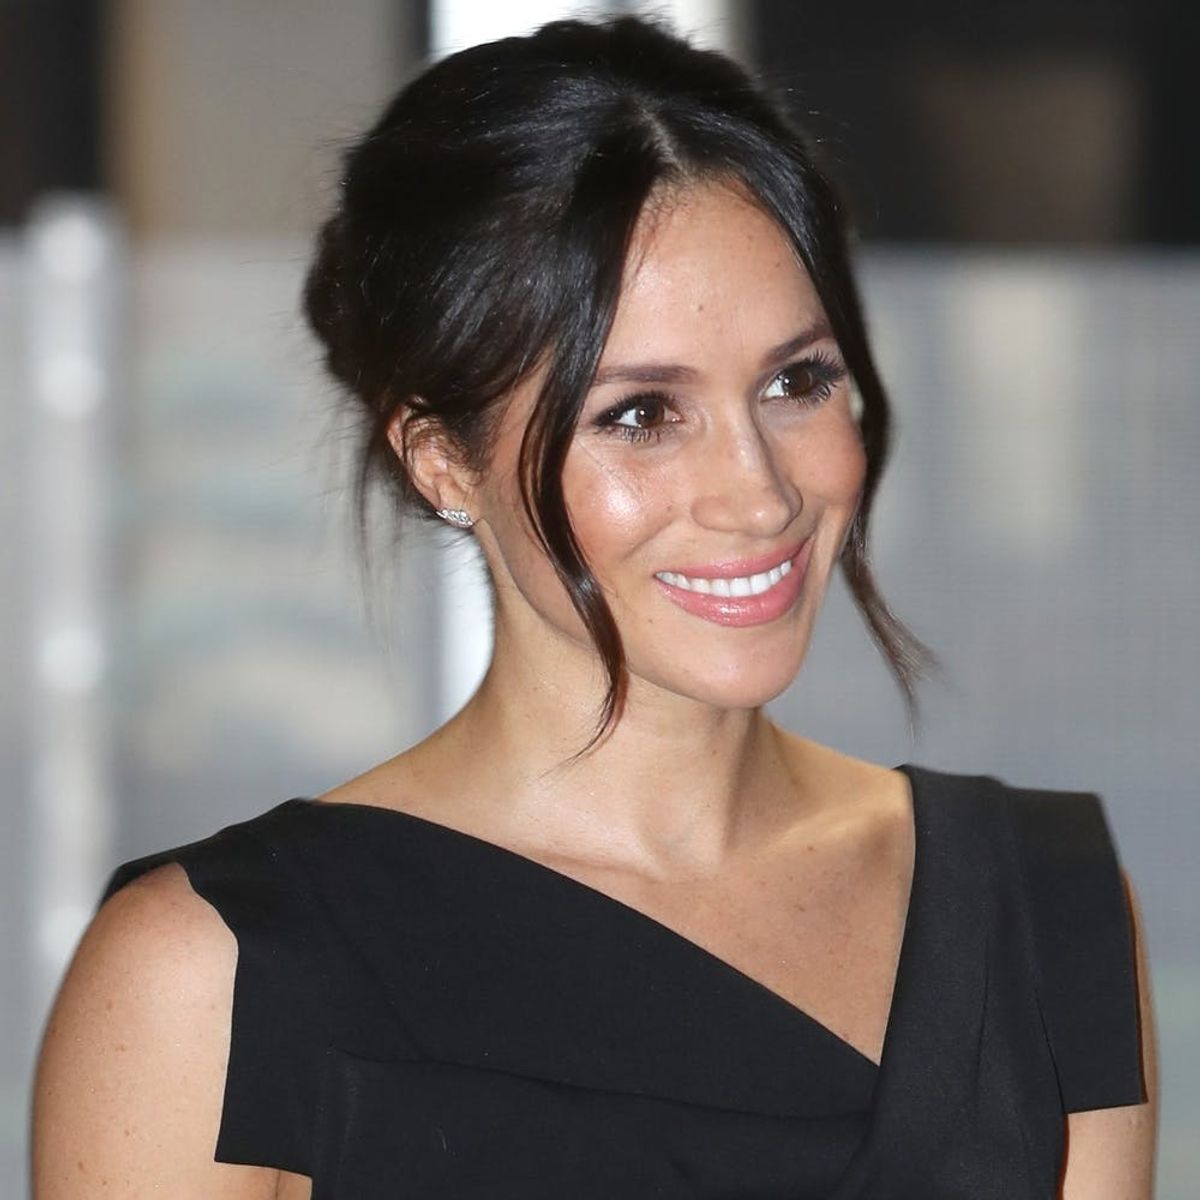 This Is Why Meghan Markle Won’t Have a Maid of Honor